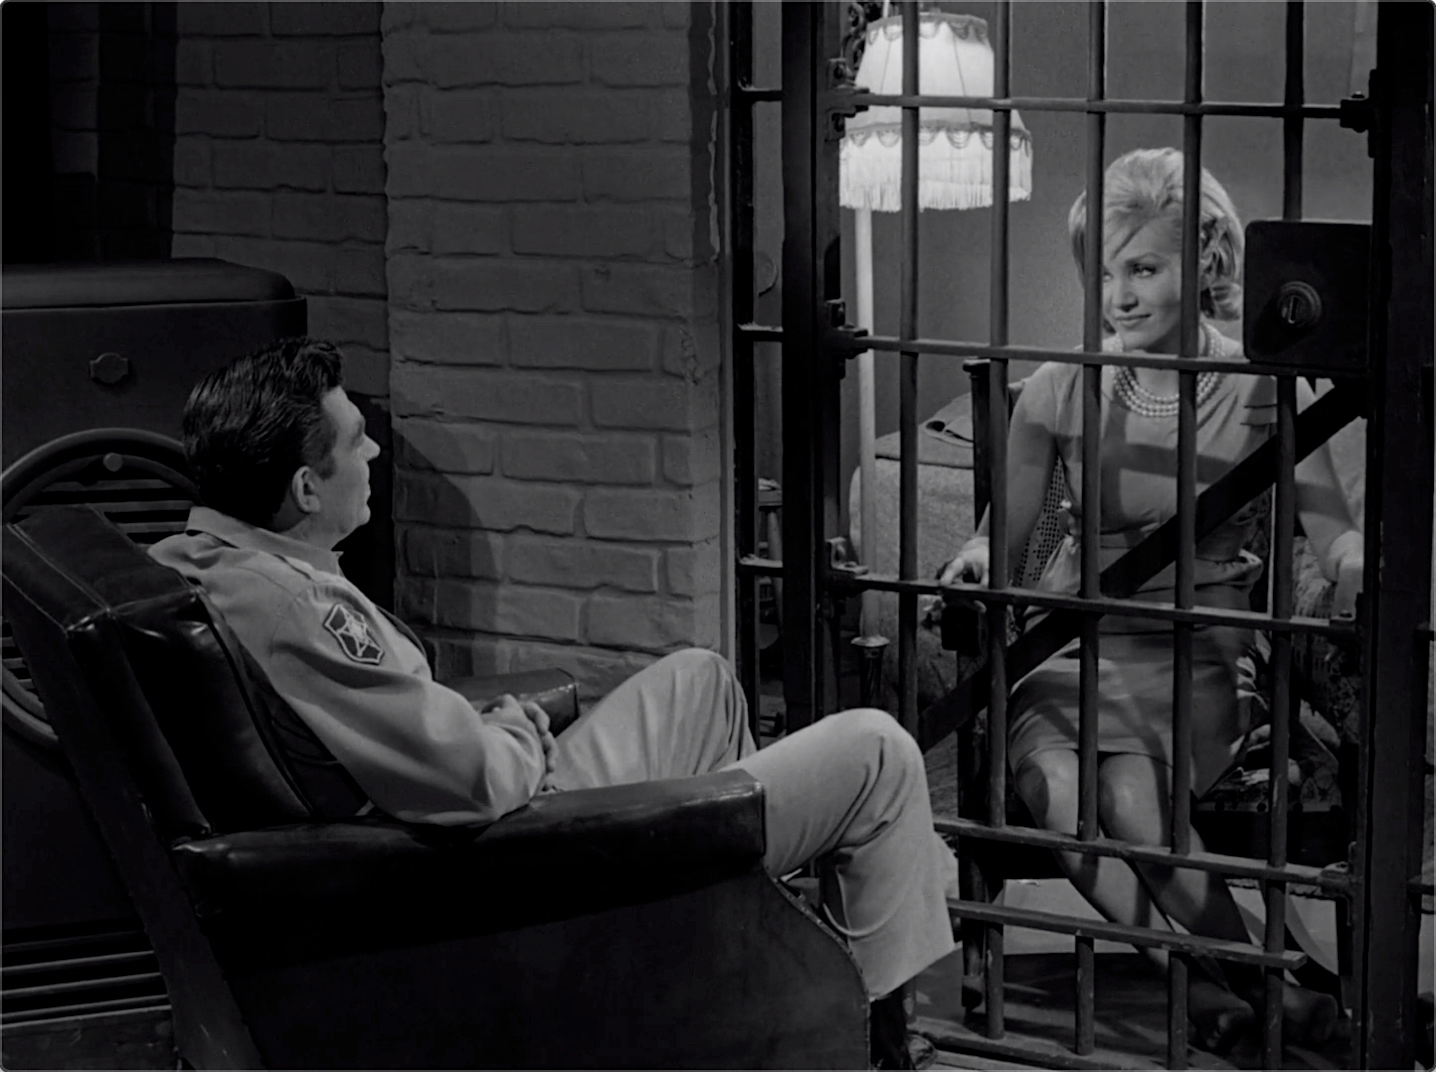 the-andy-griffith-show-s04e18-prisoner-of-love-feb-10-1964-120-jpg.185829